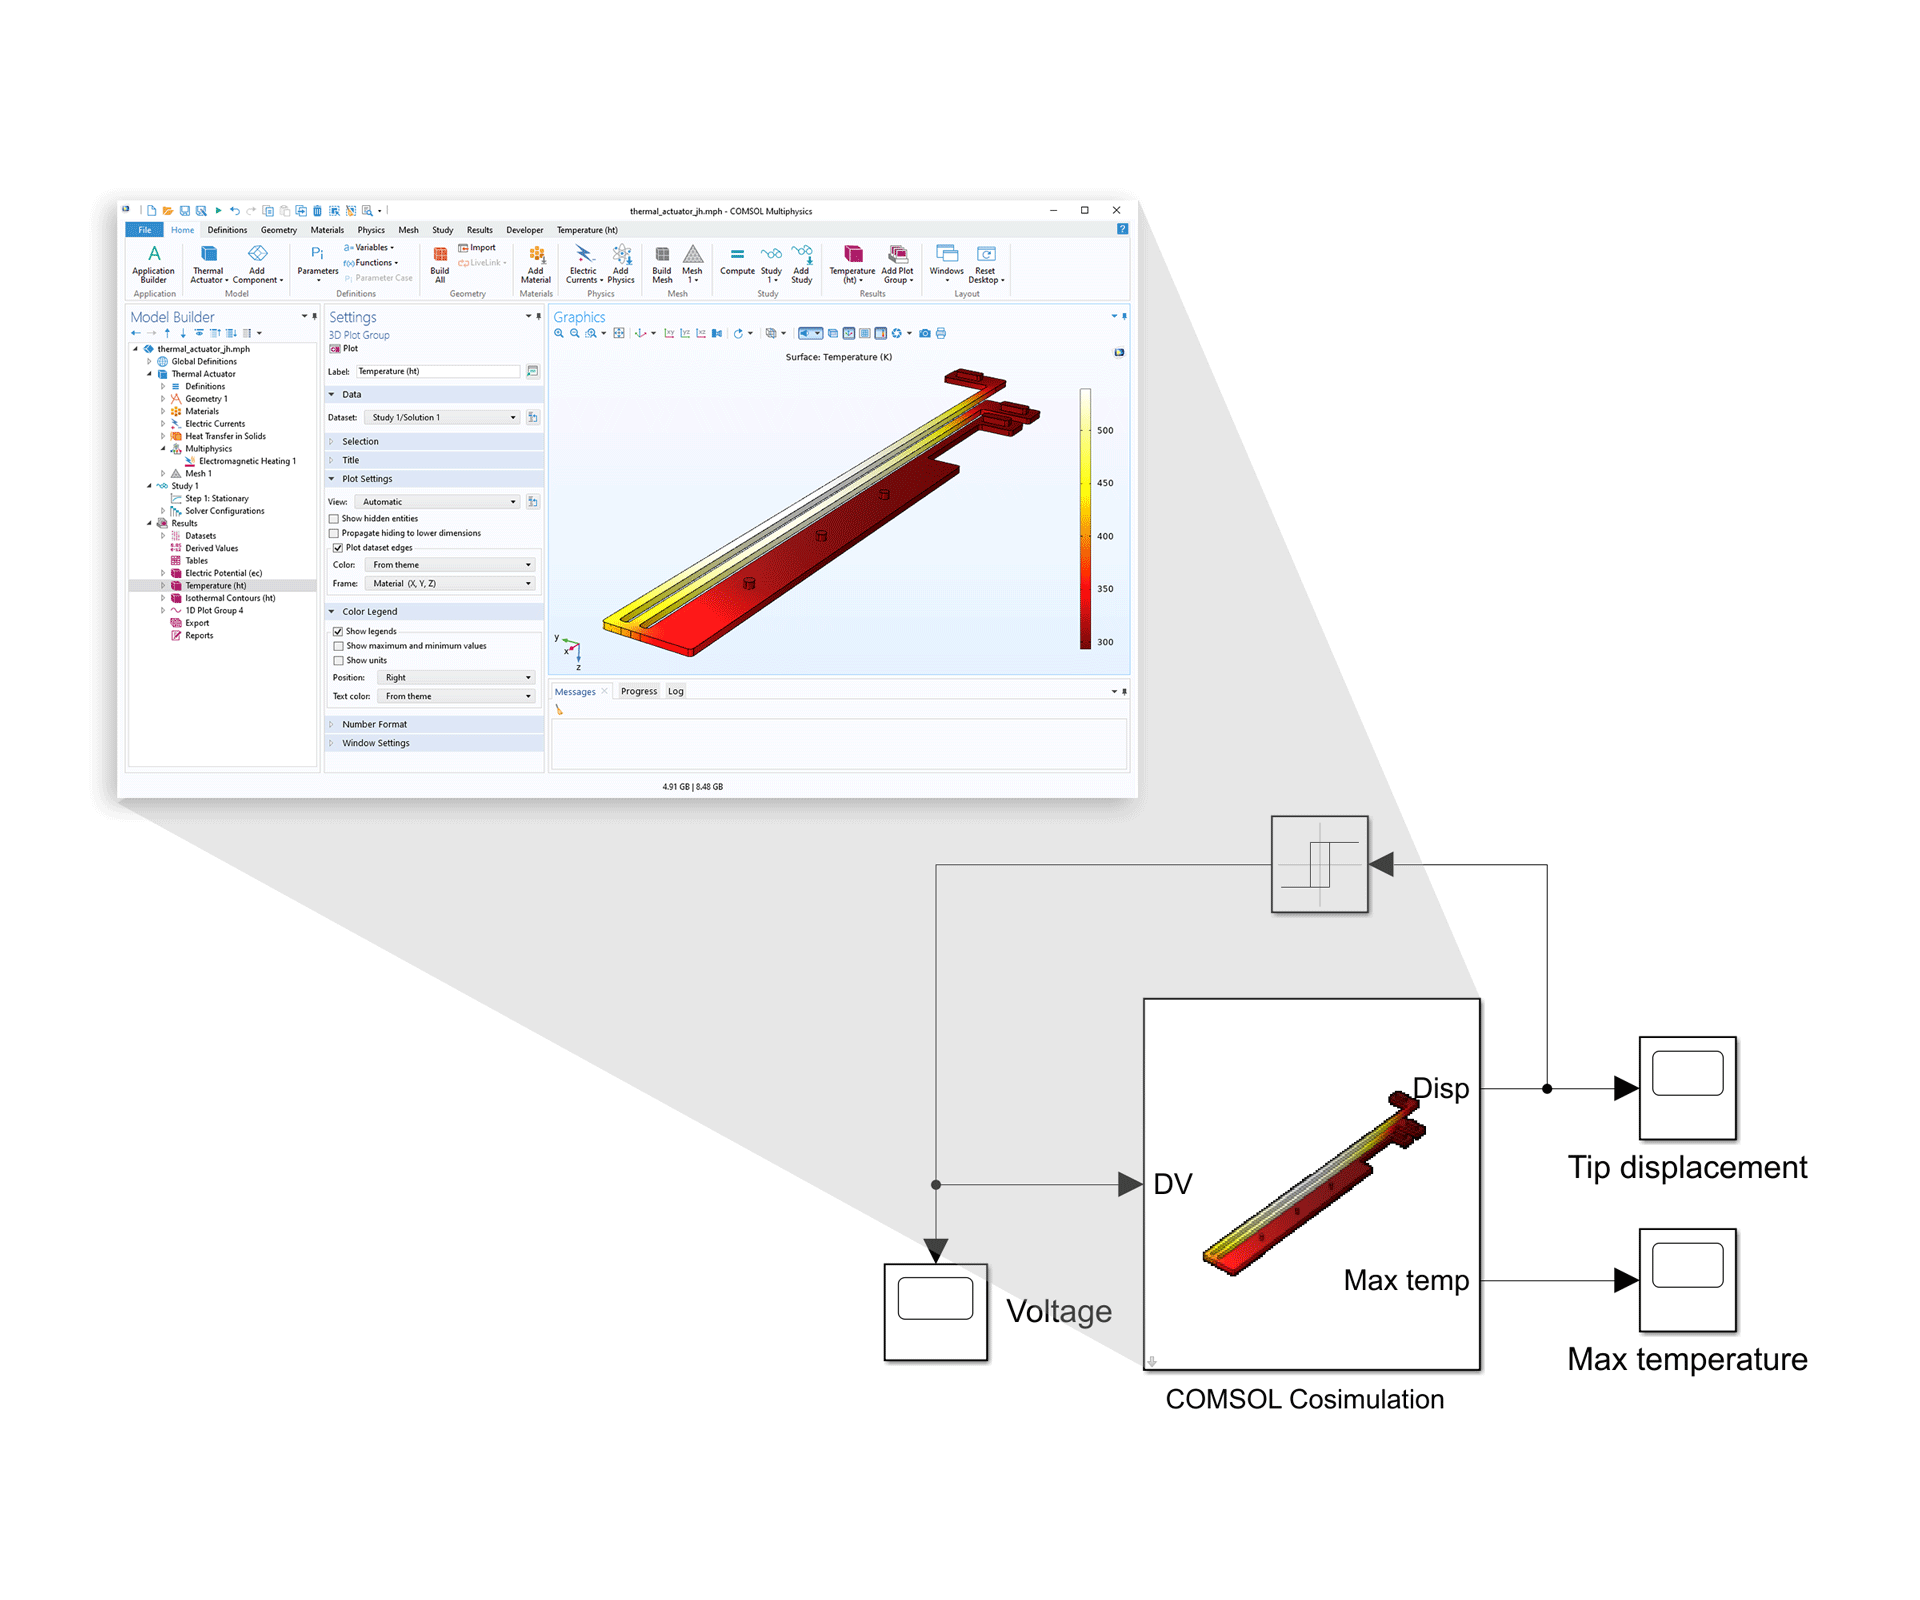 A LiveLink for Simulink cosimulation diagram and an inset of the COMSOL Multiphysics UI with a two-hot-arm thermal actuator model in the Graphics window.